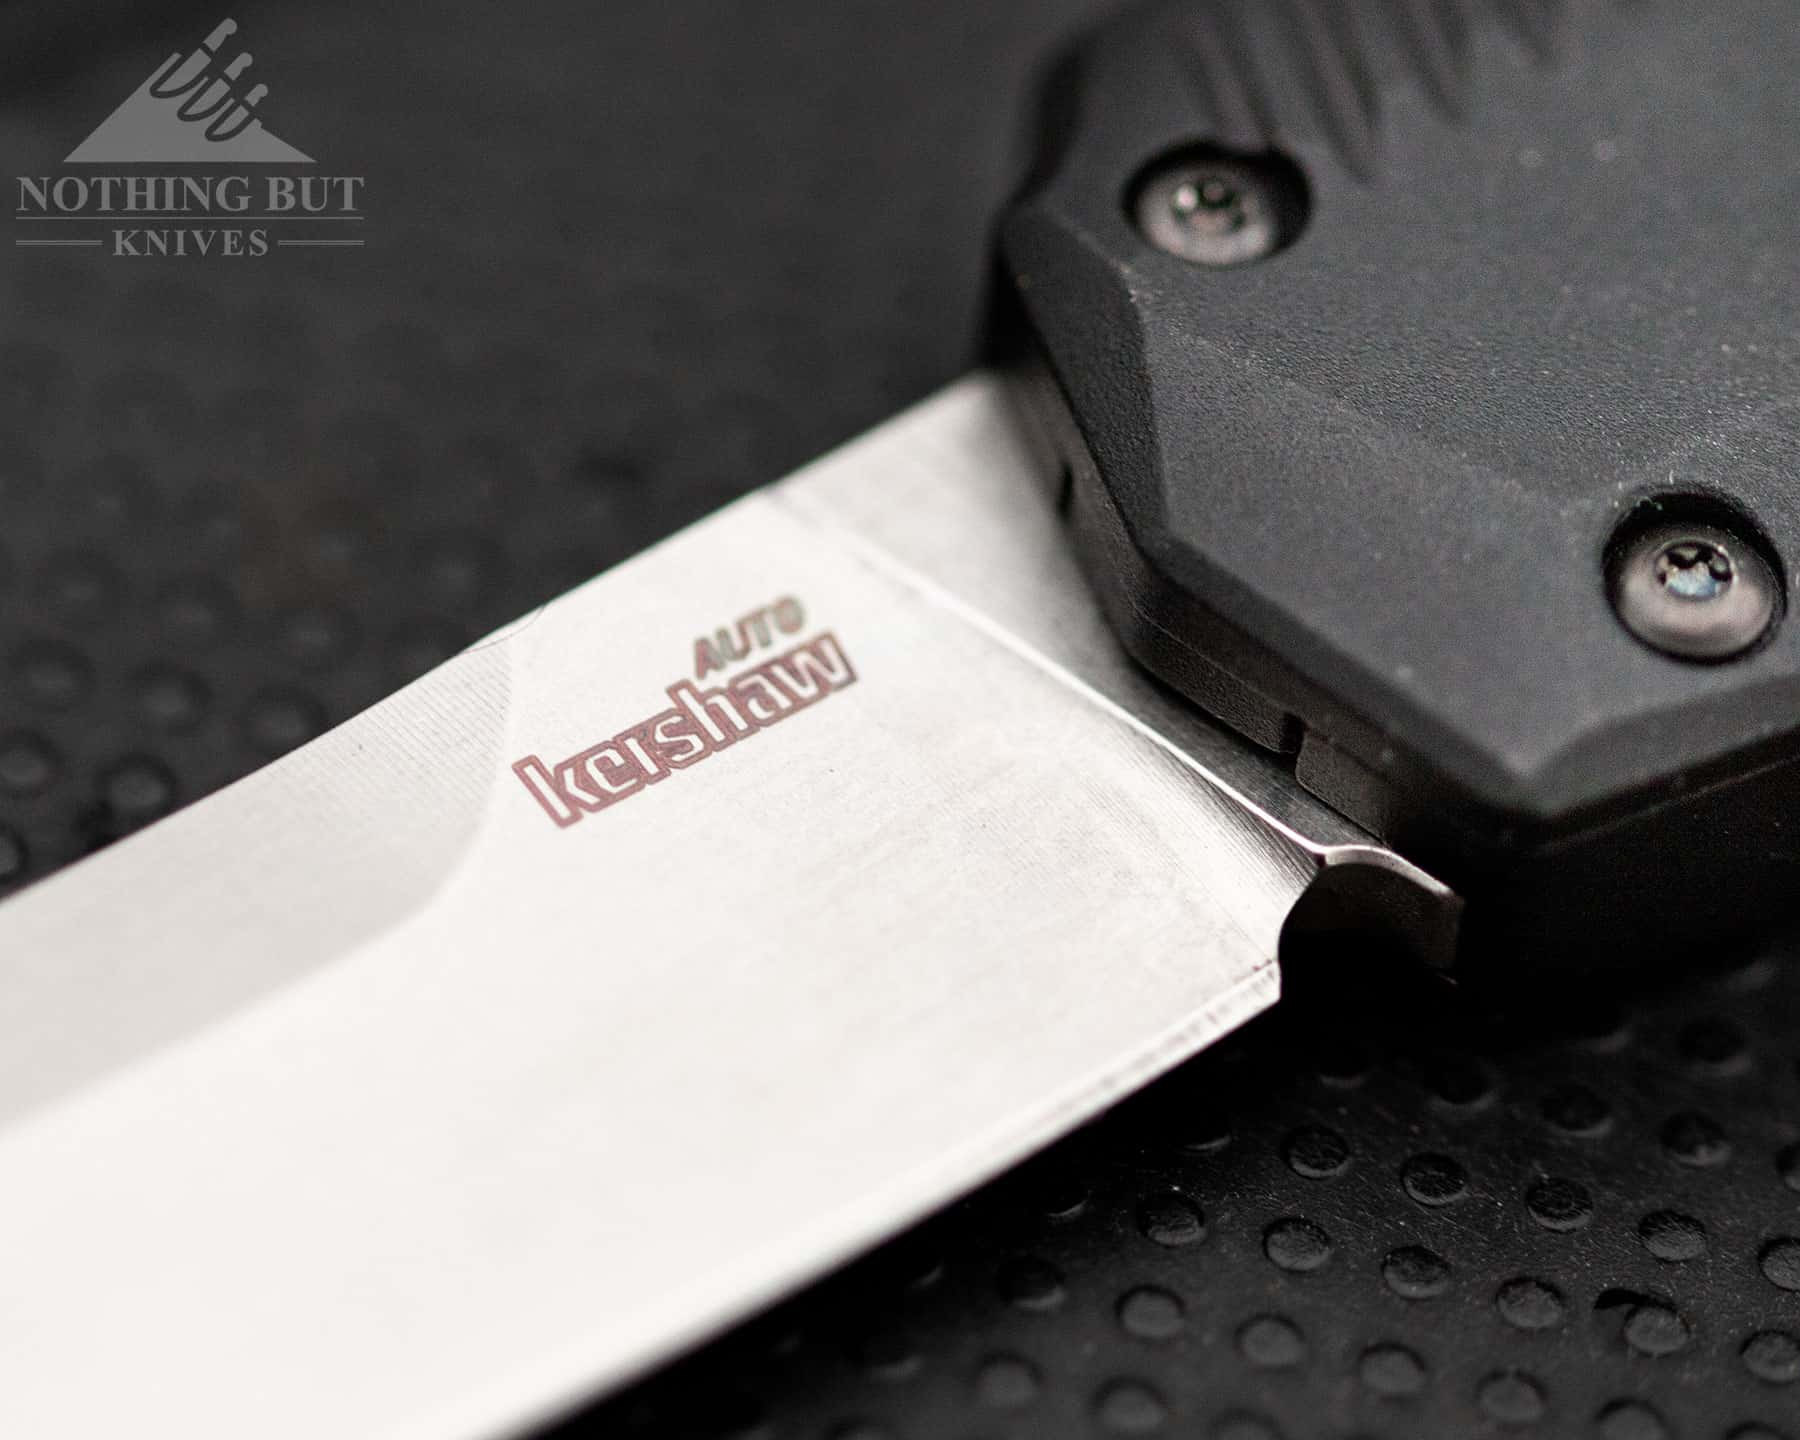 The Kershaw logo on the Livewire blade is small enough to not be distracting. 